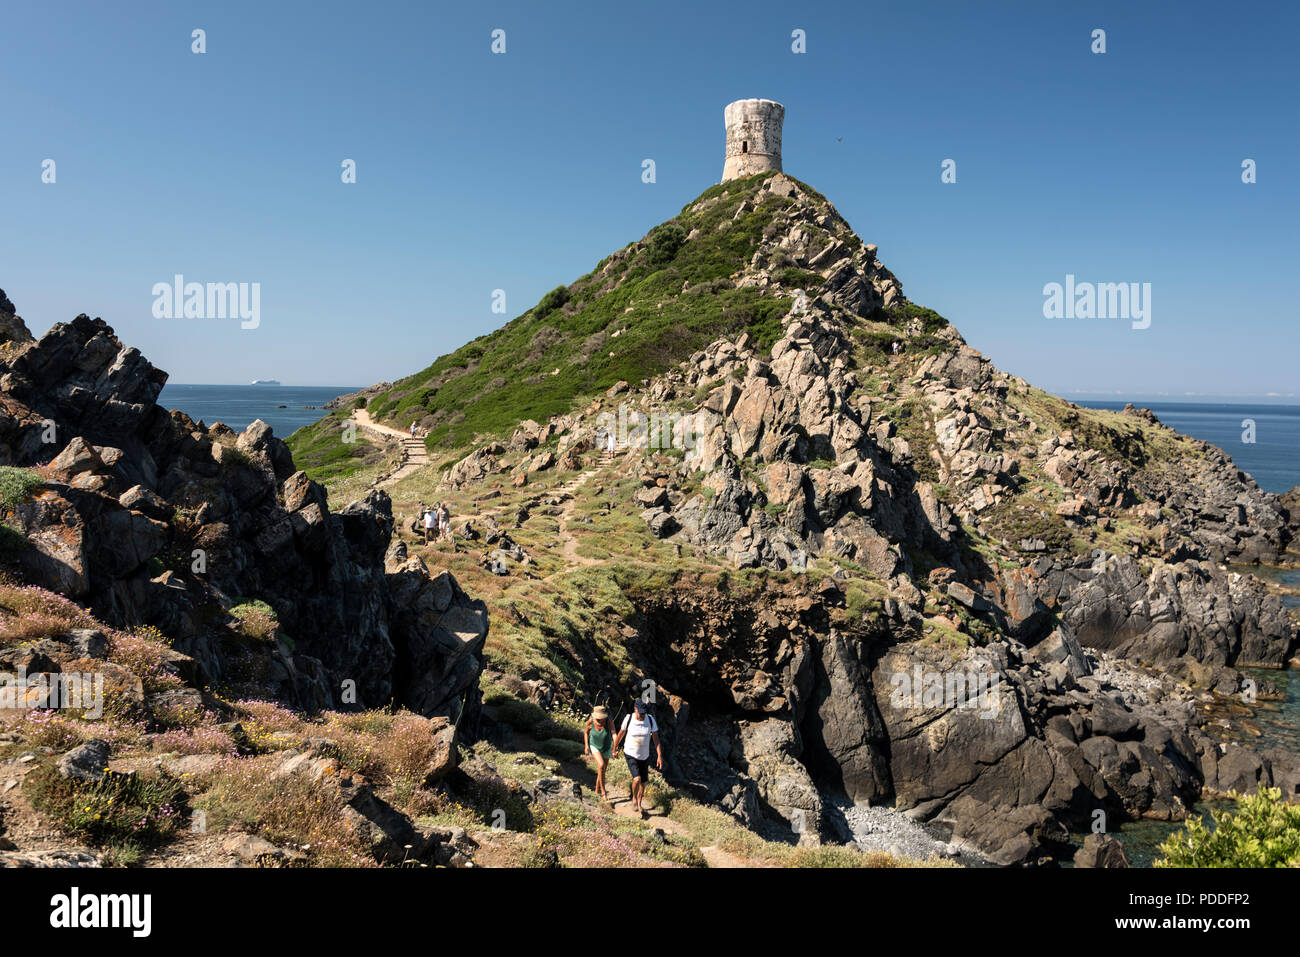 A popular venue for visitors visiting La Pointe de la Parata, ( Point of Parata ) with a Genoese defence watch tower built in the 15th-16th centuries, Stock Photo